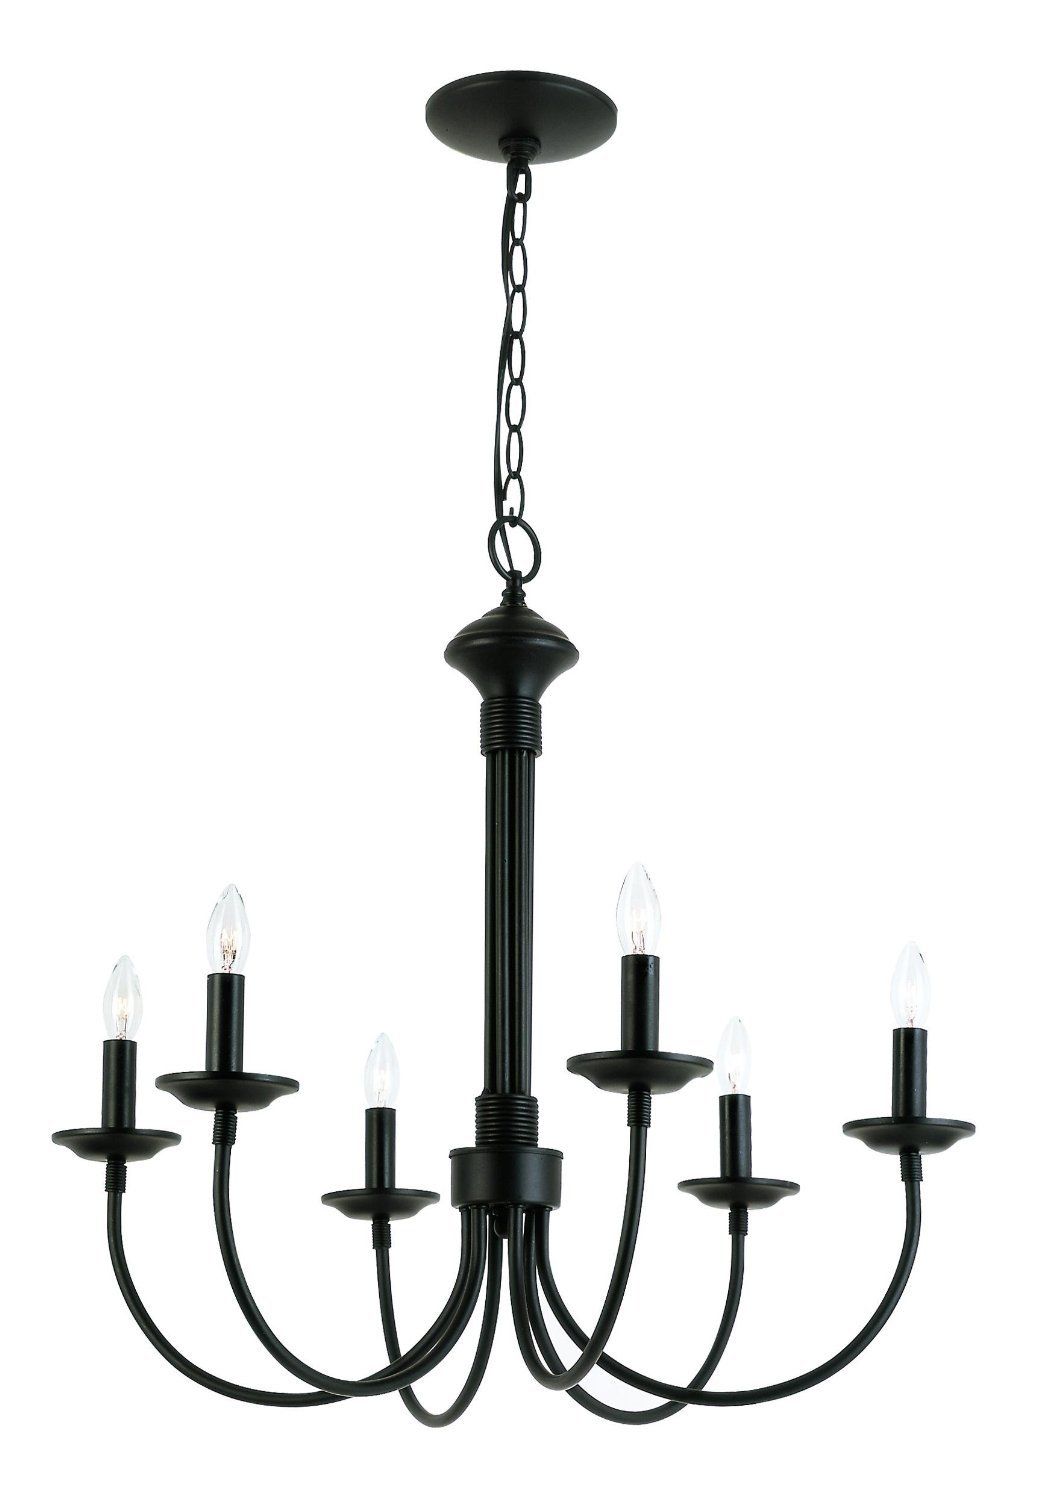 Shaylee 6 Light Candle Style Chandelier Regarding Hamza 6 Light Candle Style Chandeliers (View 8 of 30)